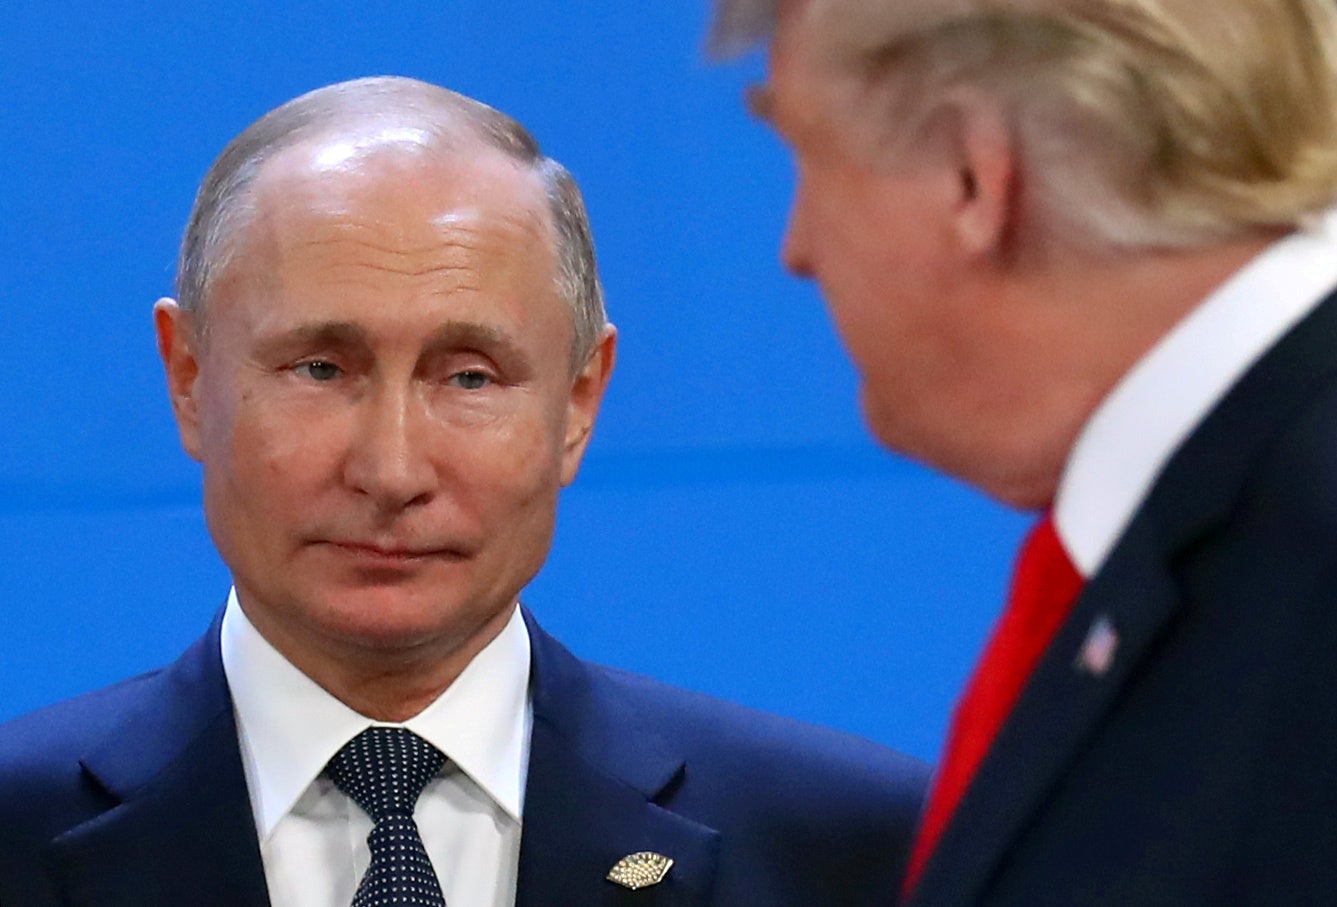 Trump has allowed Russia to expand its own sphere of influence